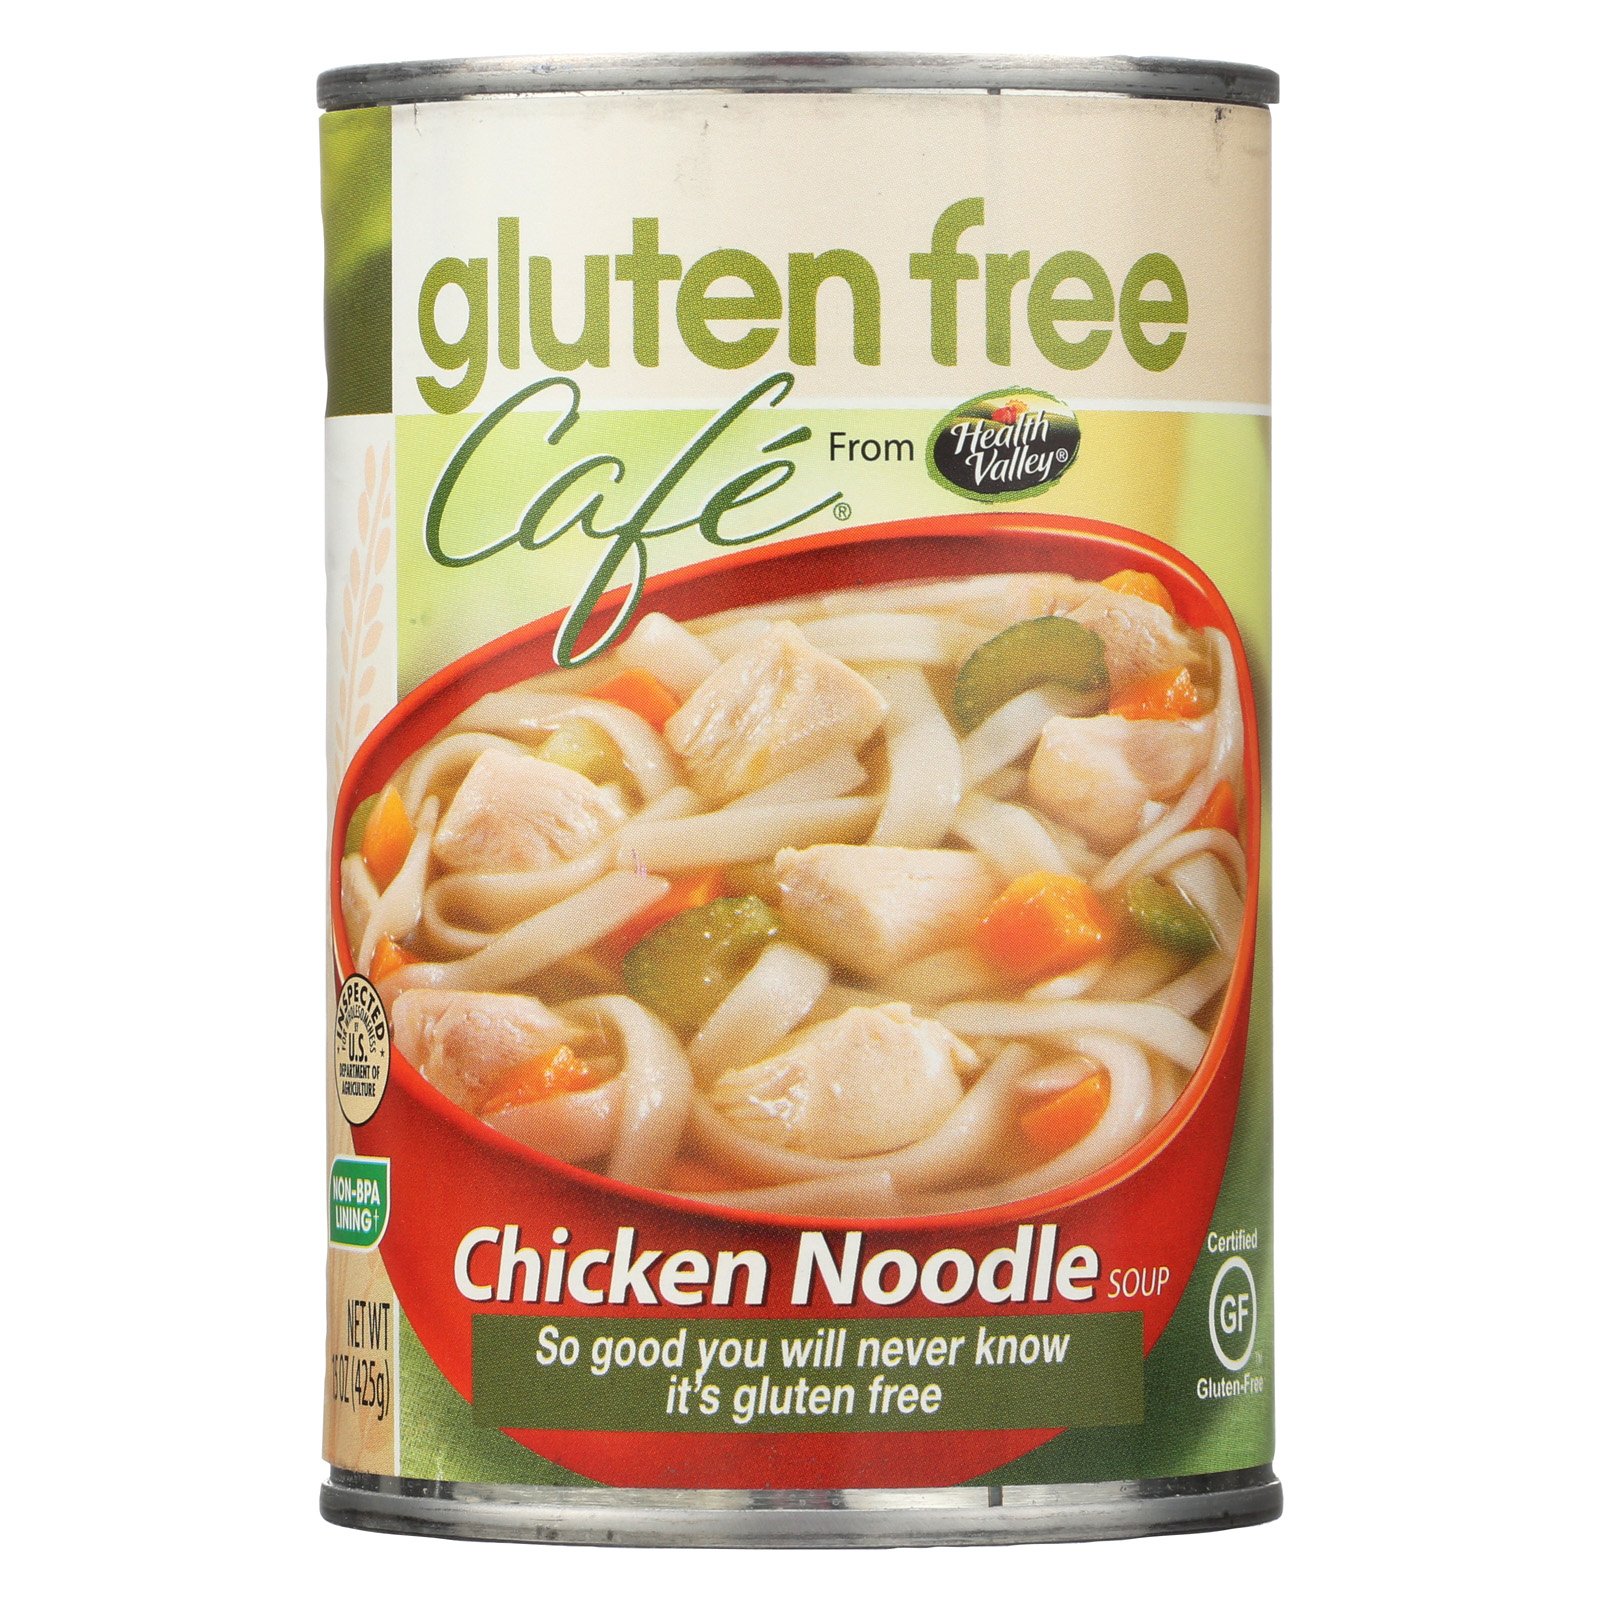 Gluten Free Cafe Soup Chicken Noodle